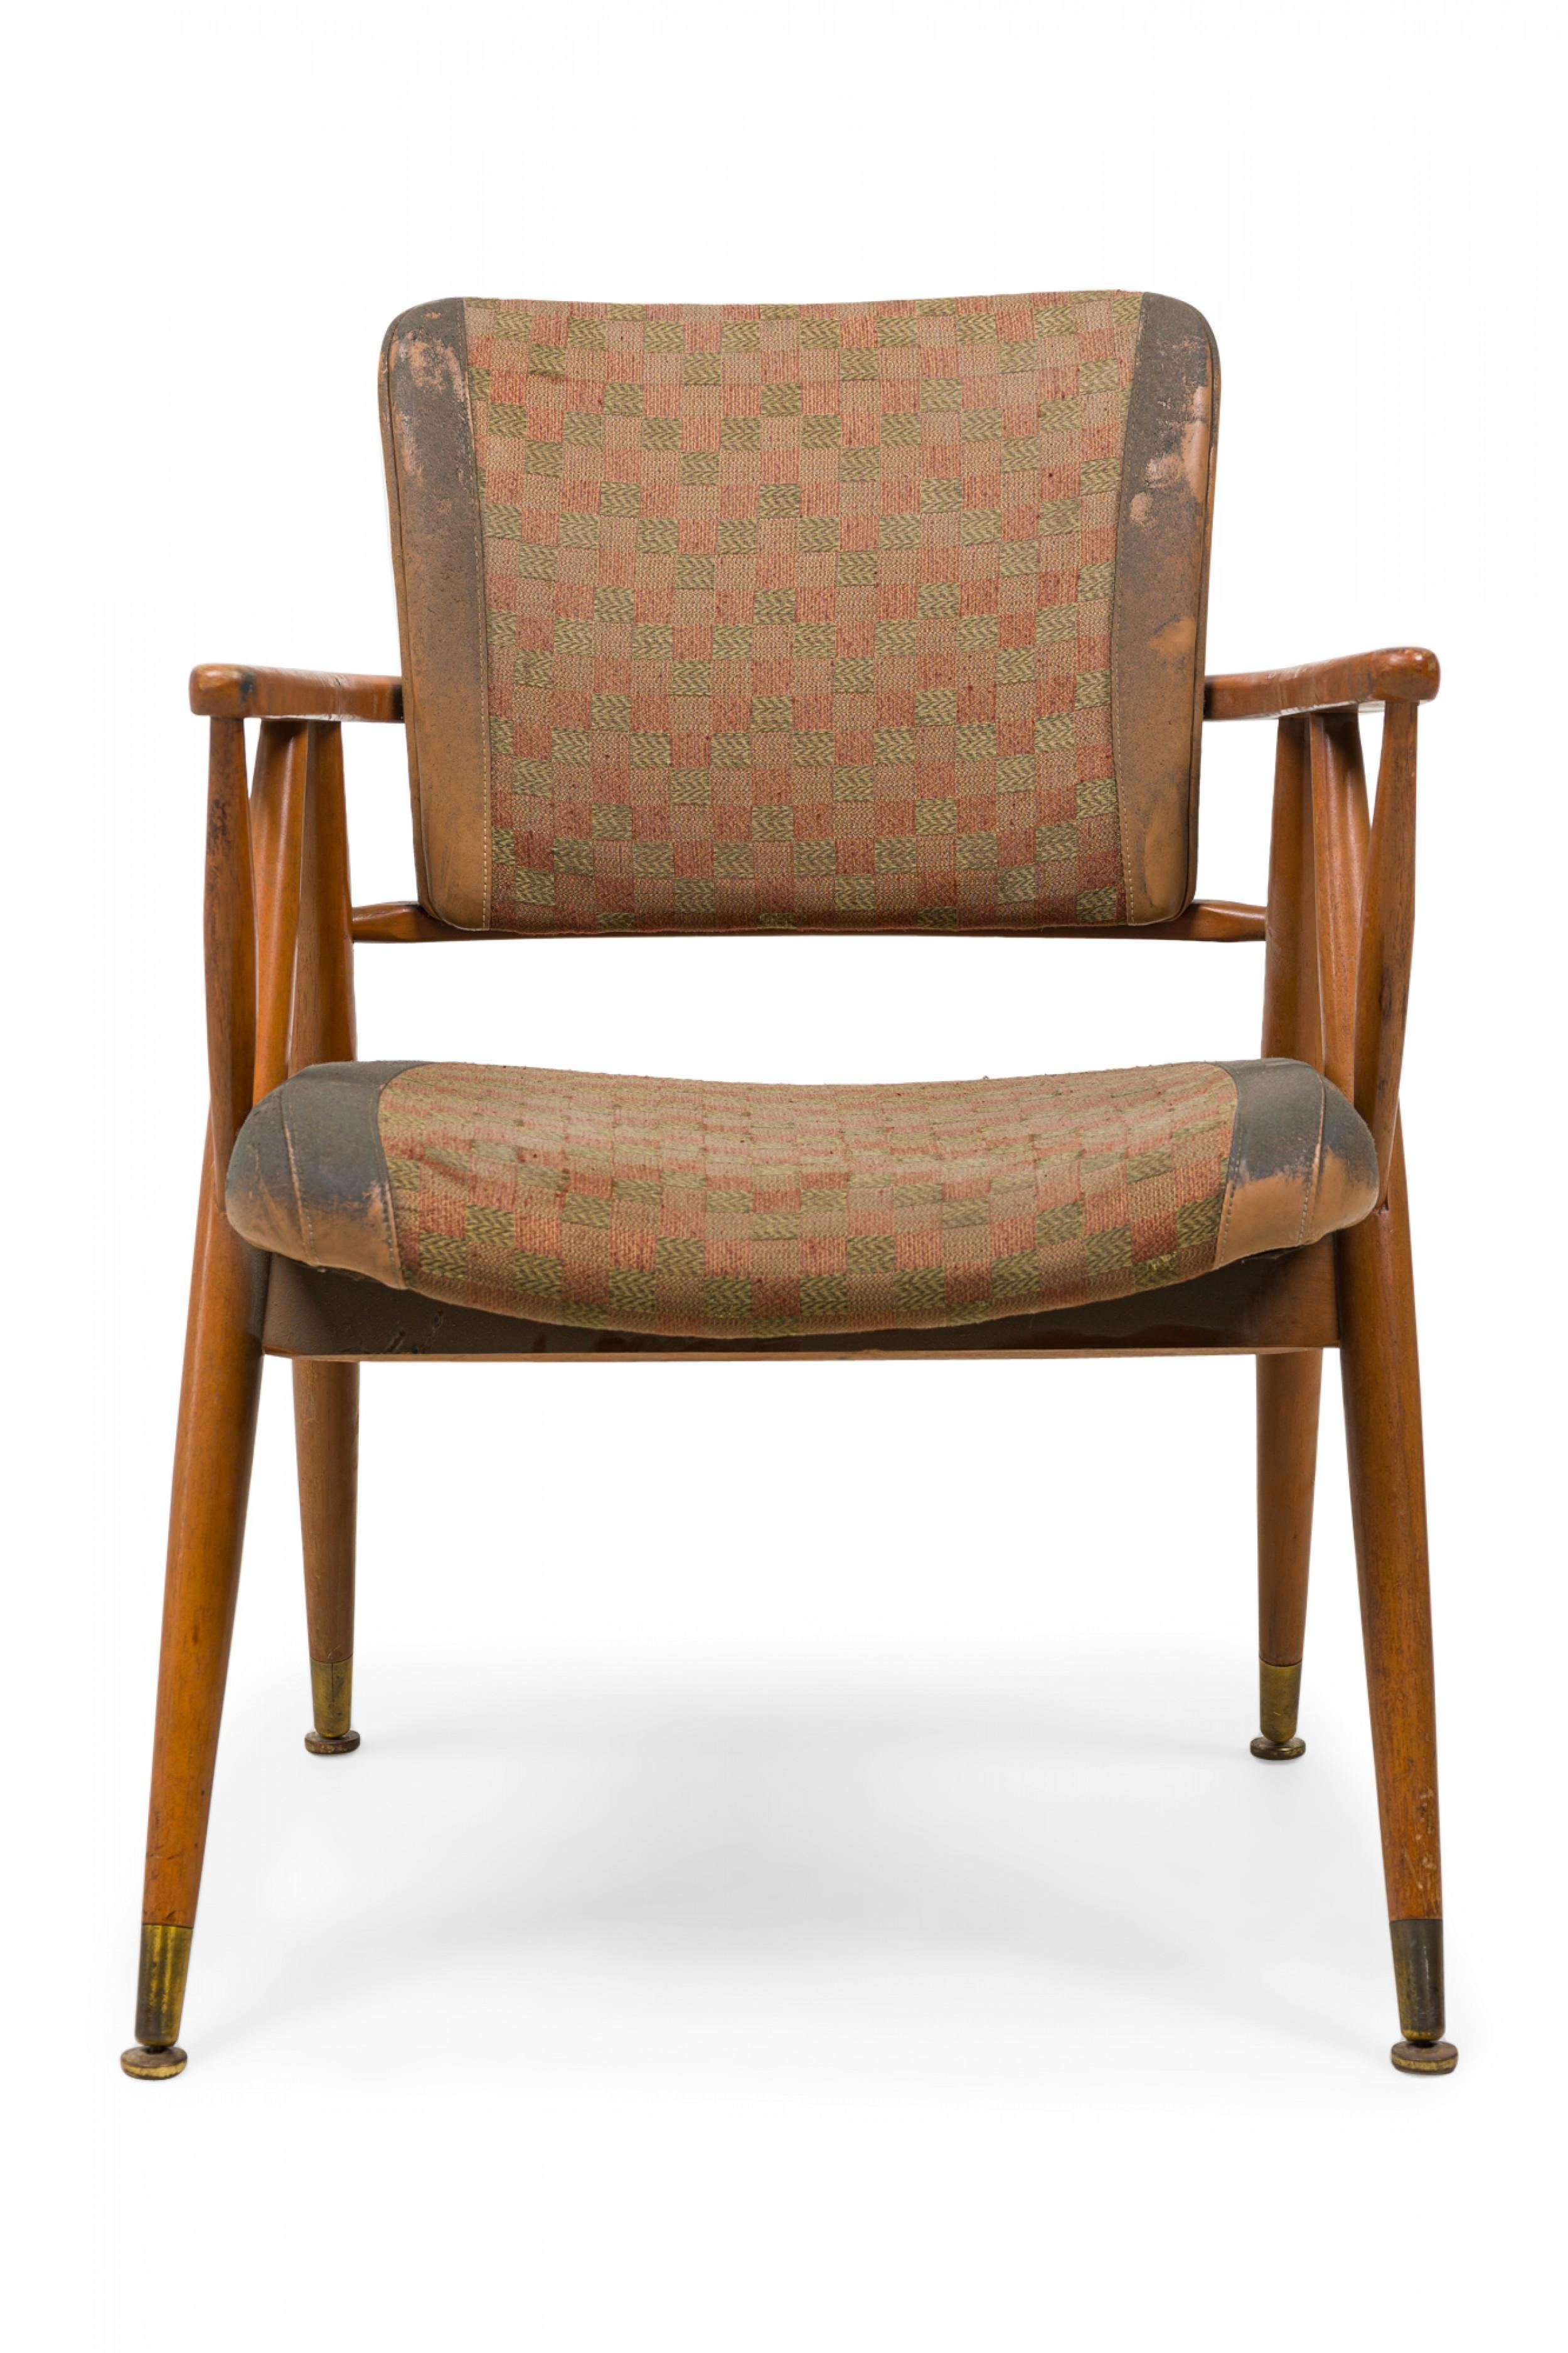 PAIR of midcentury American armchairs with shaped horseshoe arms unified with the backrest as one piece, a contoured horizontal back support, shaped back and seat cushions upholstered in a beige and gray checkerboard patterned suede / fabric